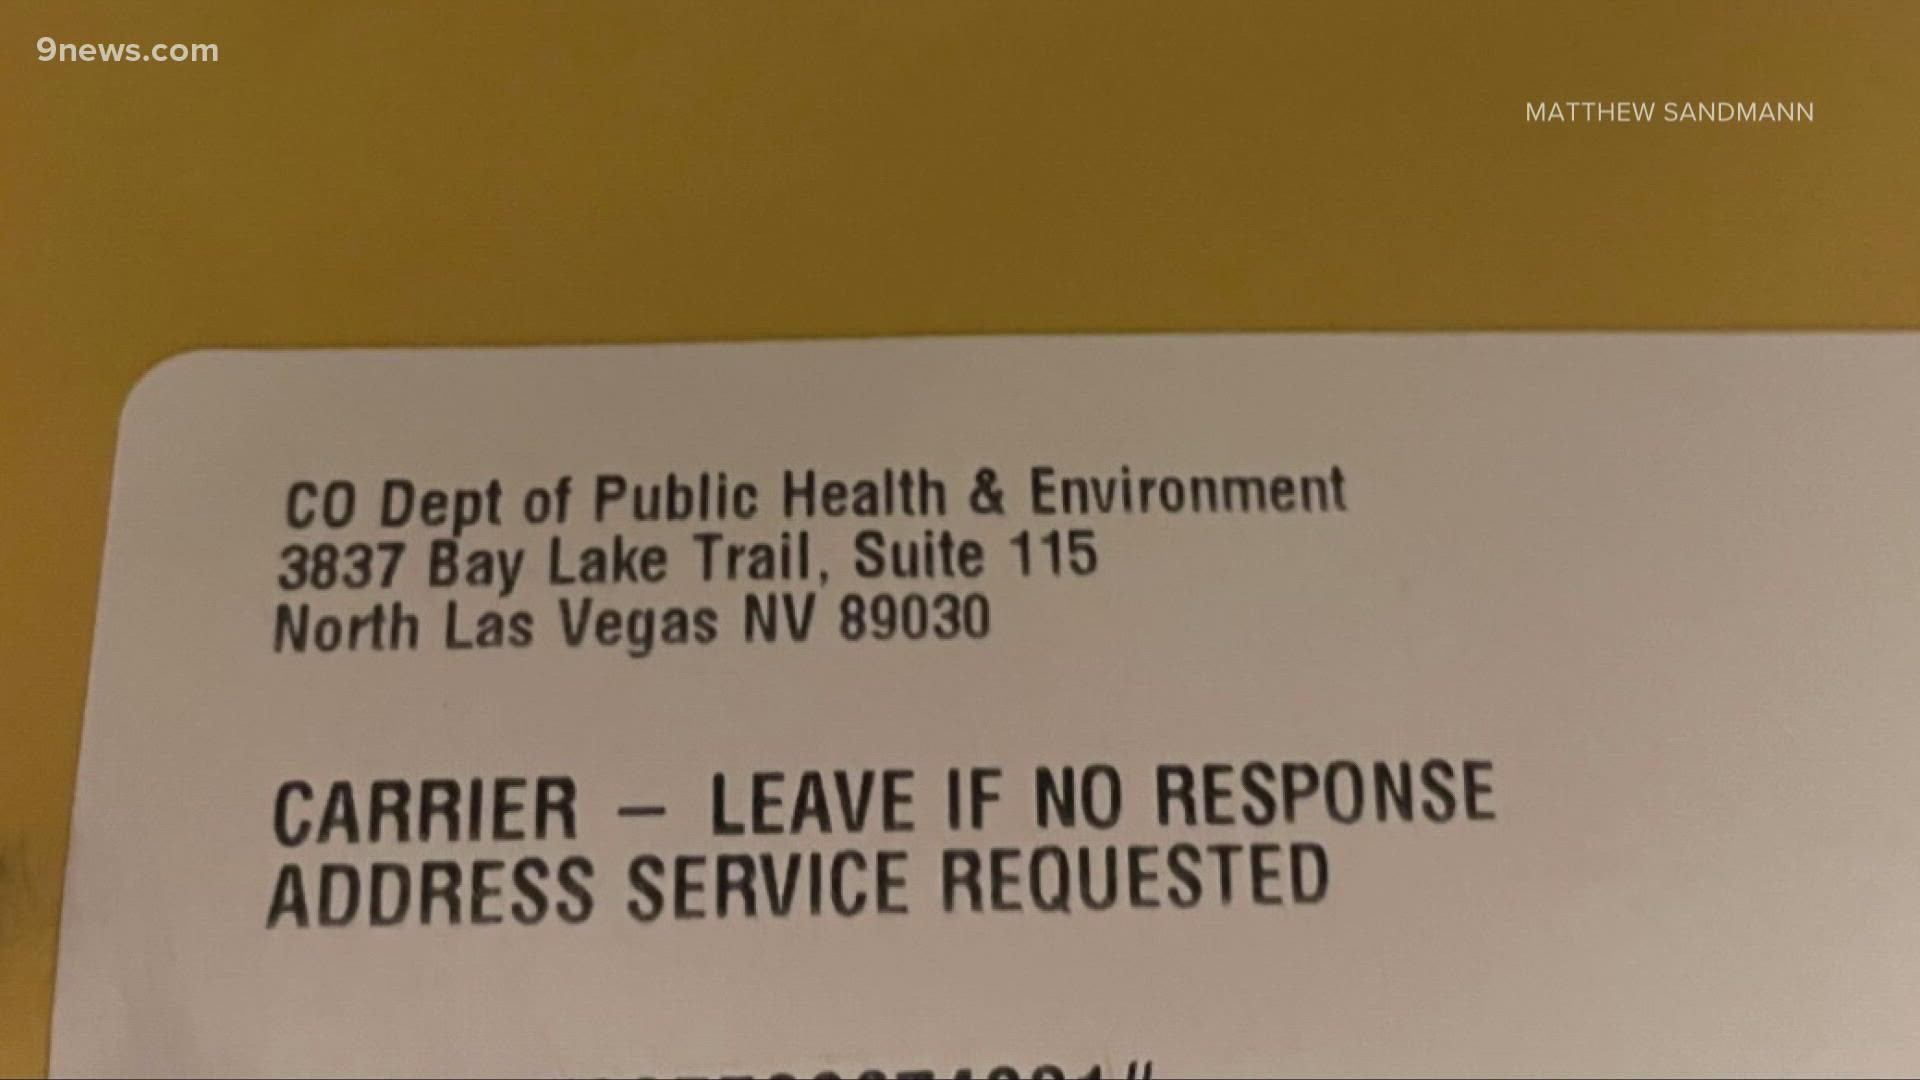 A viewer who ordered free COVID tests from Colorado noticed the health department's return address was for North Las Vegas, Nevada.